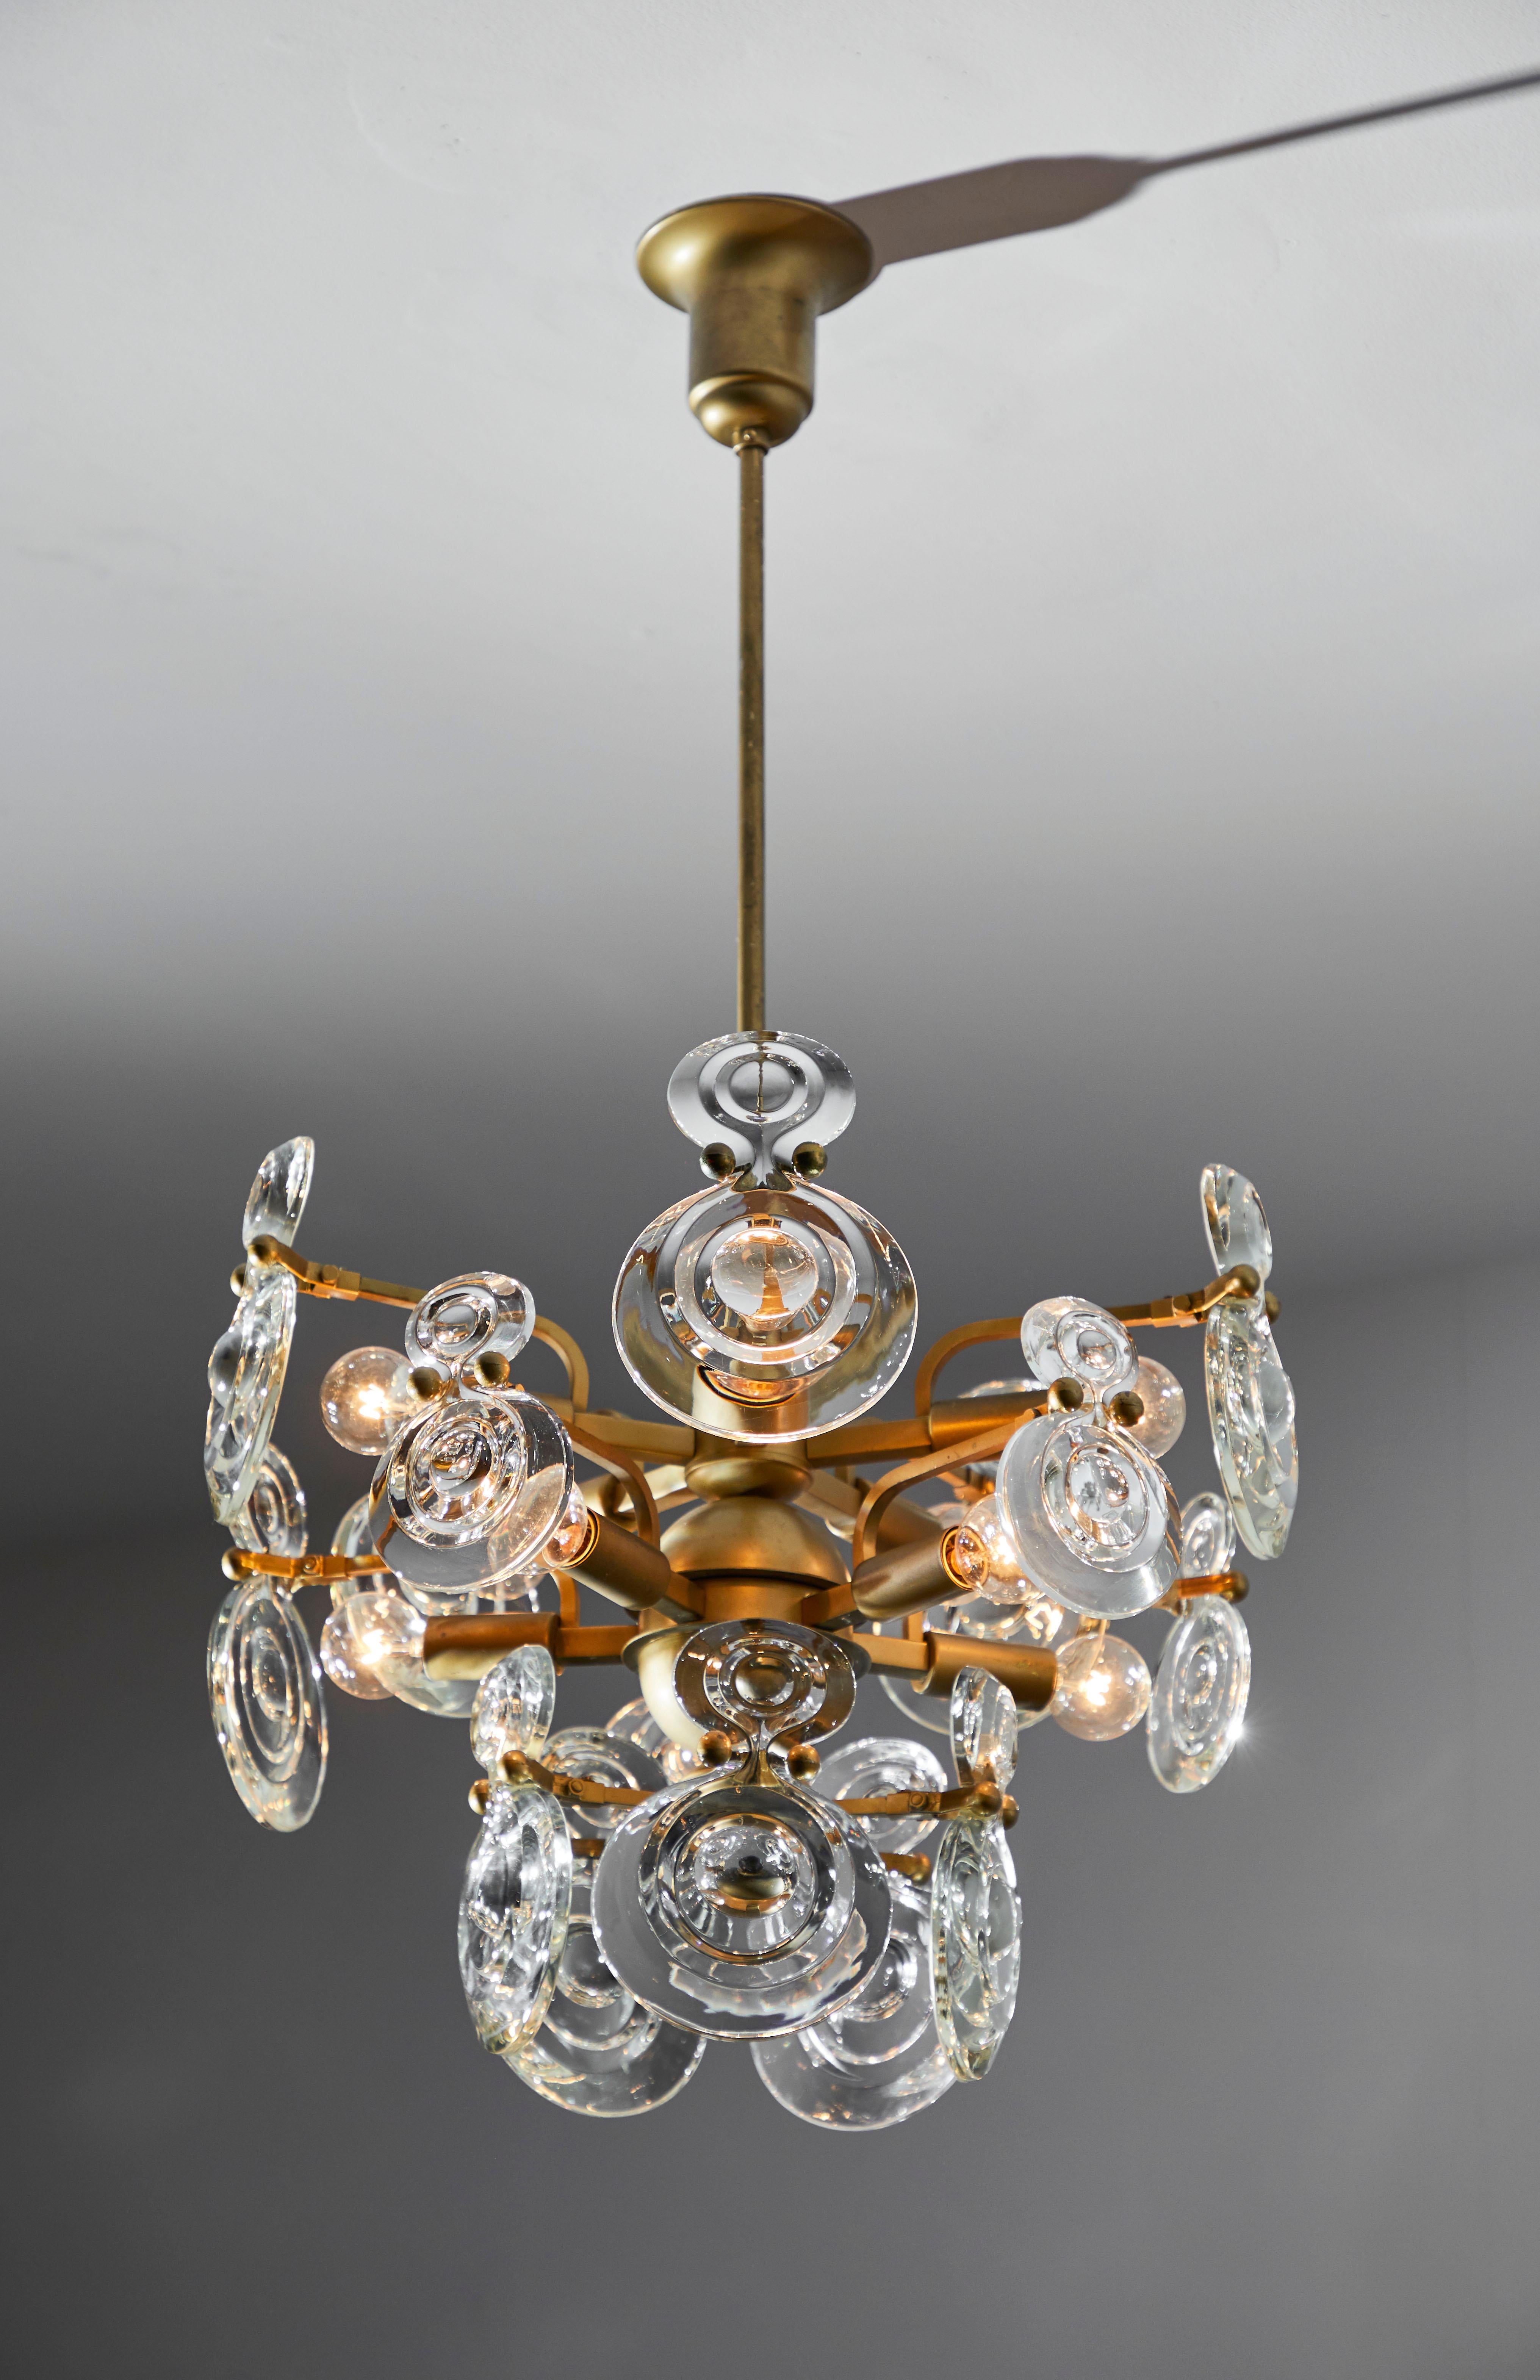 Suspension light by Gaetano Sciolari. Manufactured in Italy, circa 1960s. Brass, glass. Rewired for U.S. junction boxes. Original canopy, custom brass ceiling plate. Takes ten 40w maximum bulbs. Bulbs provided as a one time courtesy.